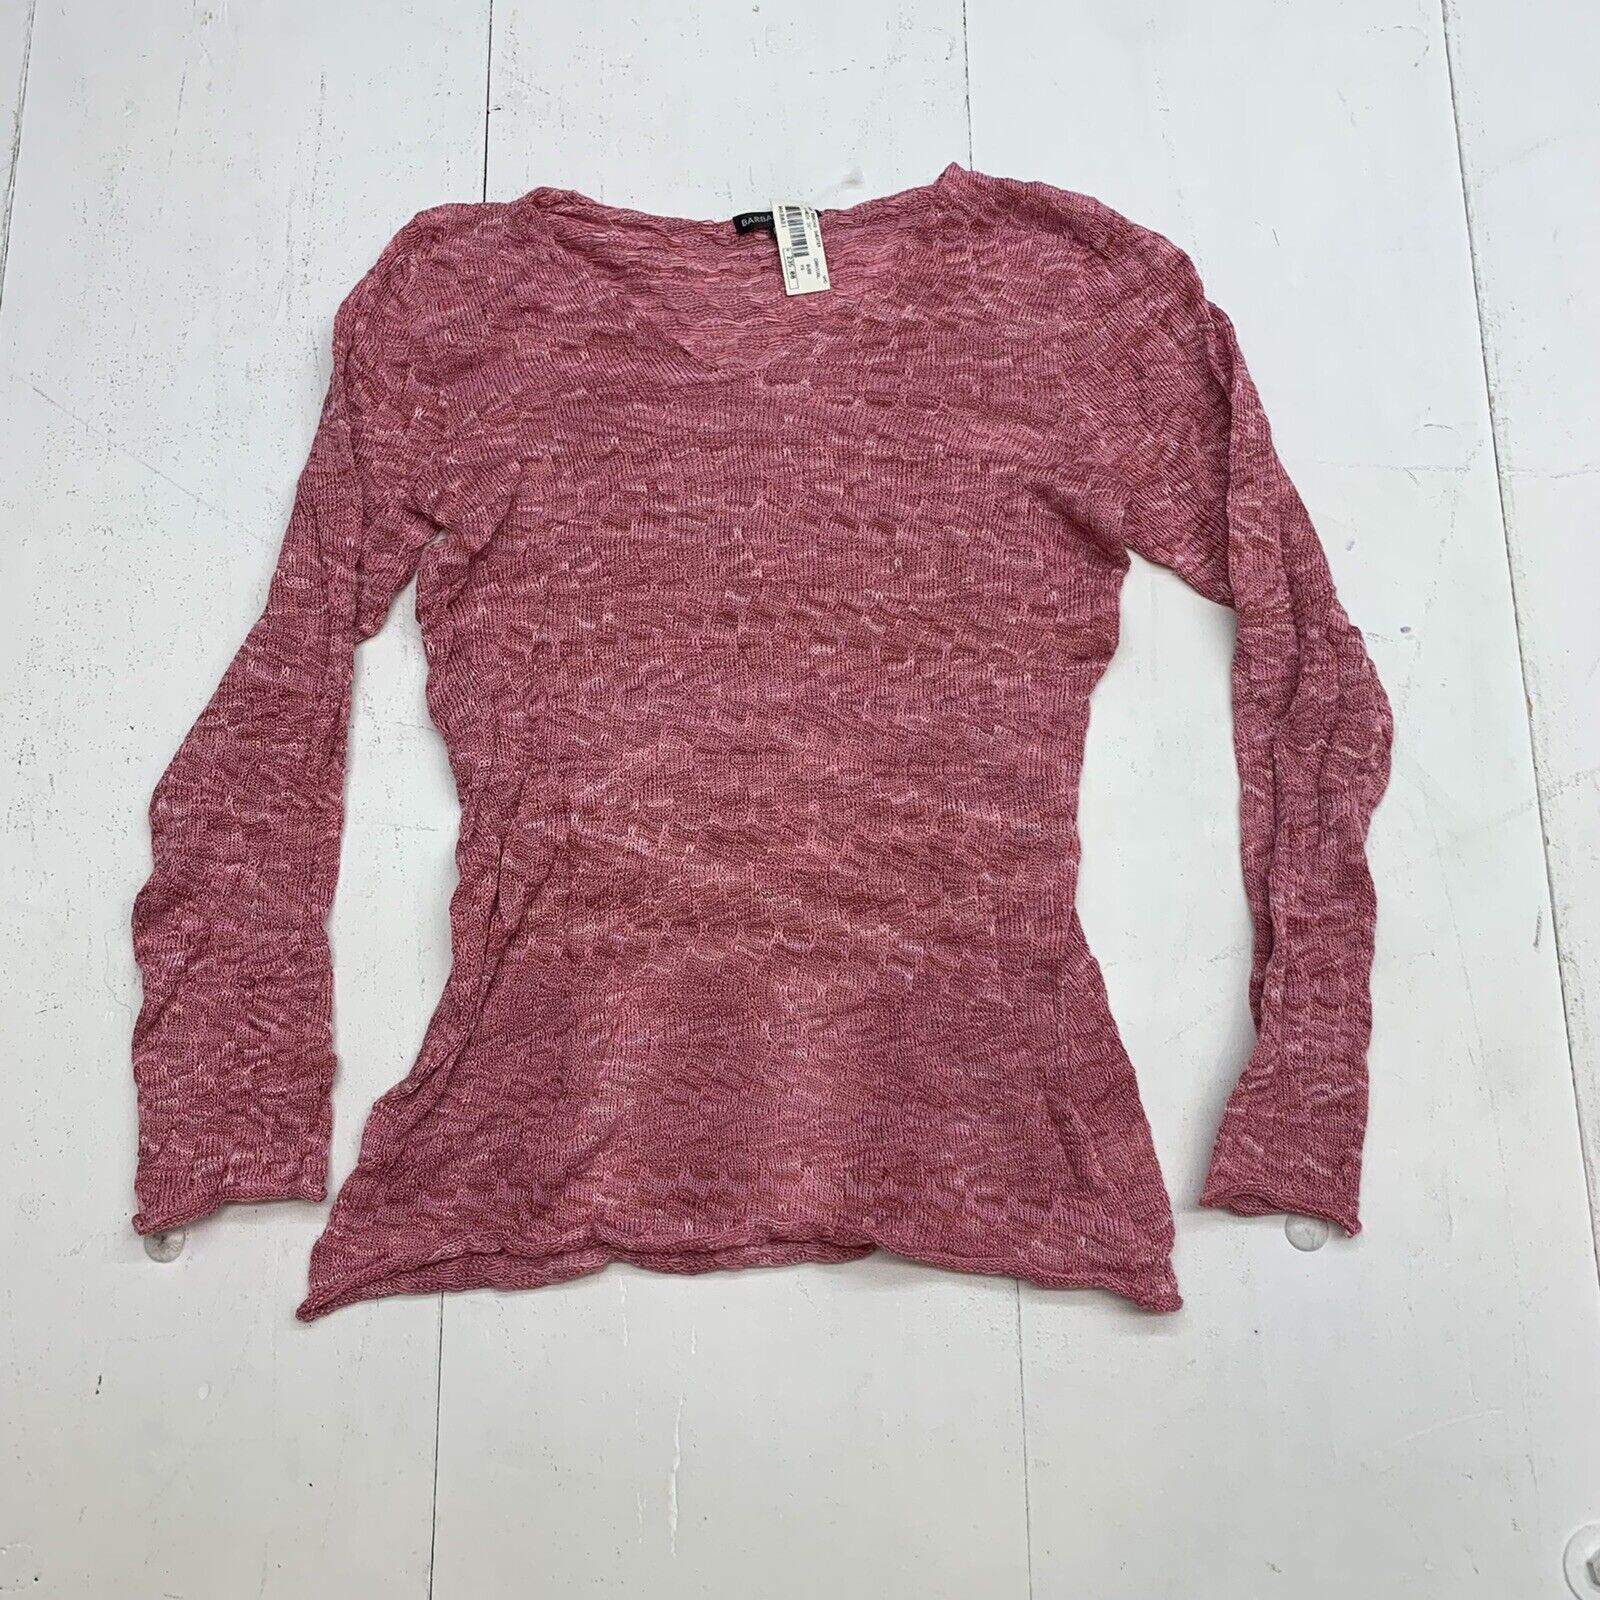 Barbara Who Pink V Neck Sweater Women’s Size FA One Size New*